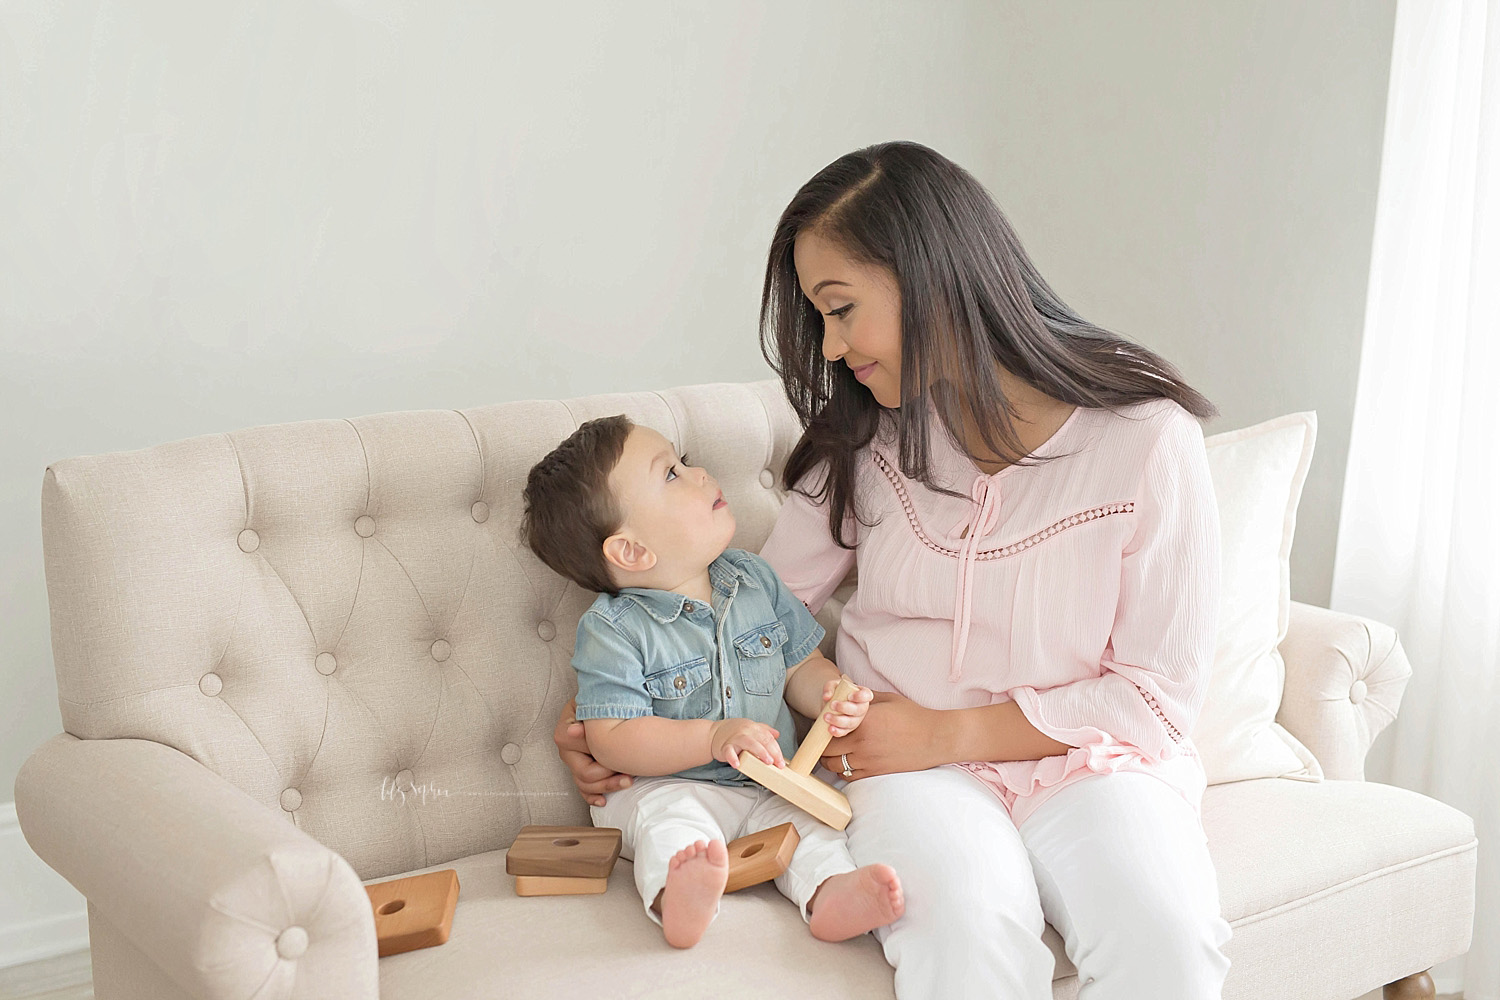  Image of a mother and her son, sitting on a couch, looking at each other while he plays with a wooden stacking toy.&nbsp; 